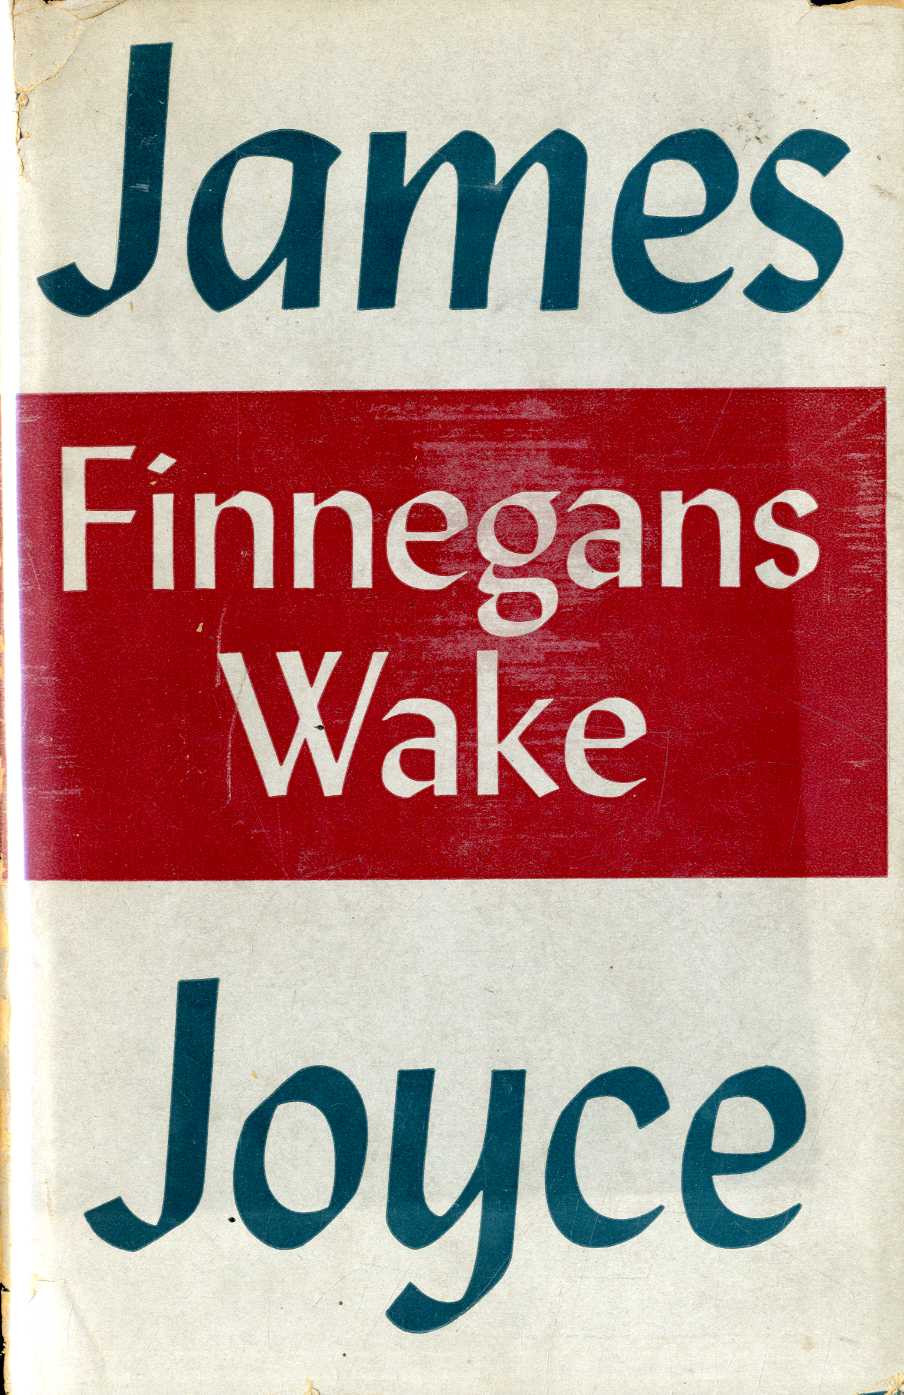 First American Edition, with tipped in Signature

Joyce (James) Finnegans Wake, imp. 8vo N. York (